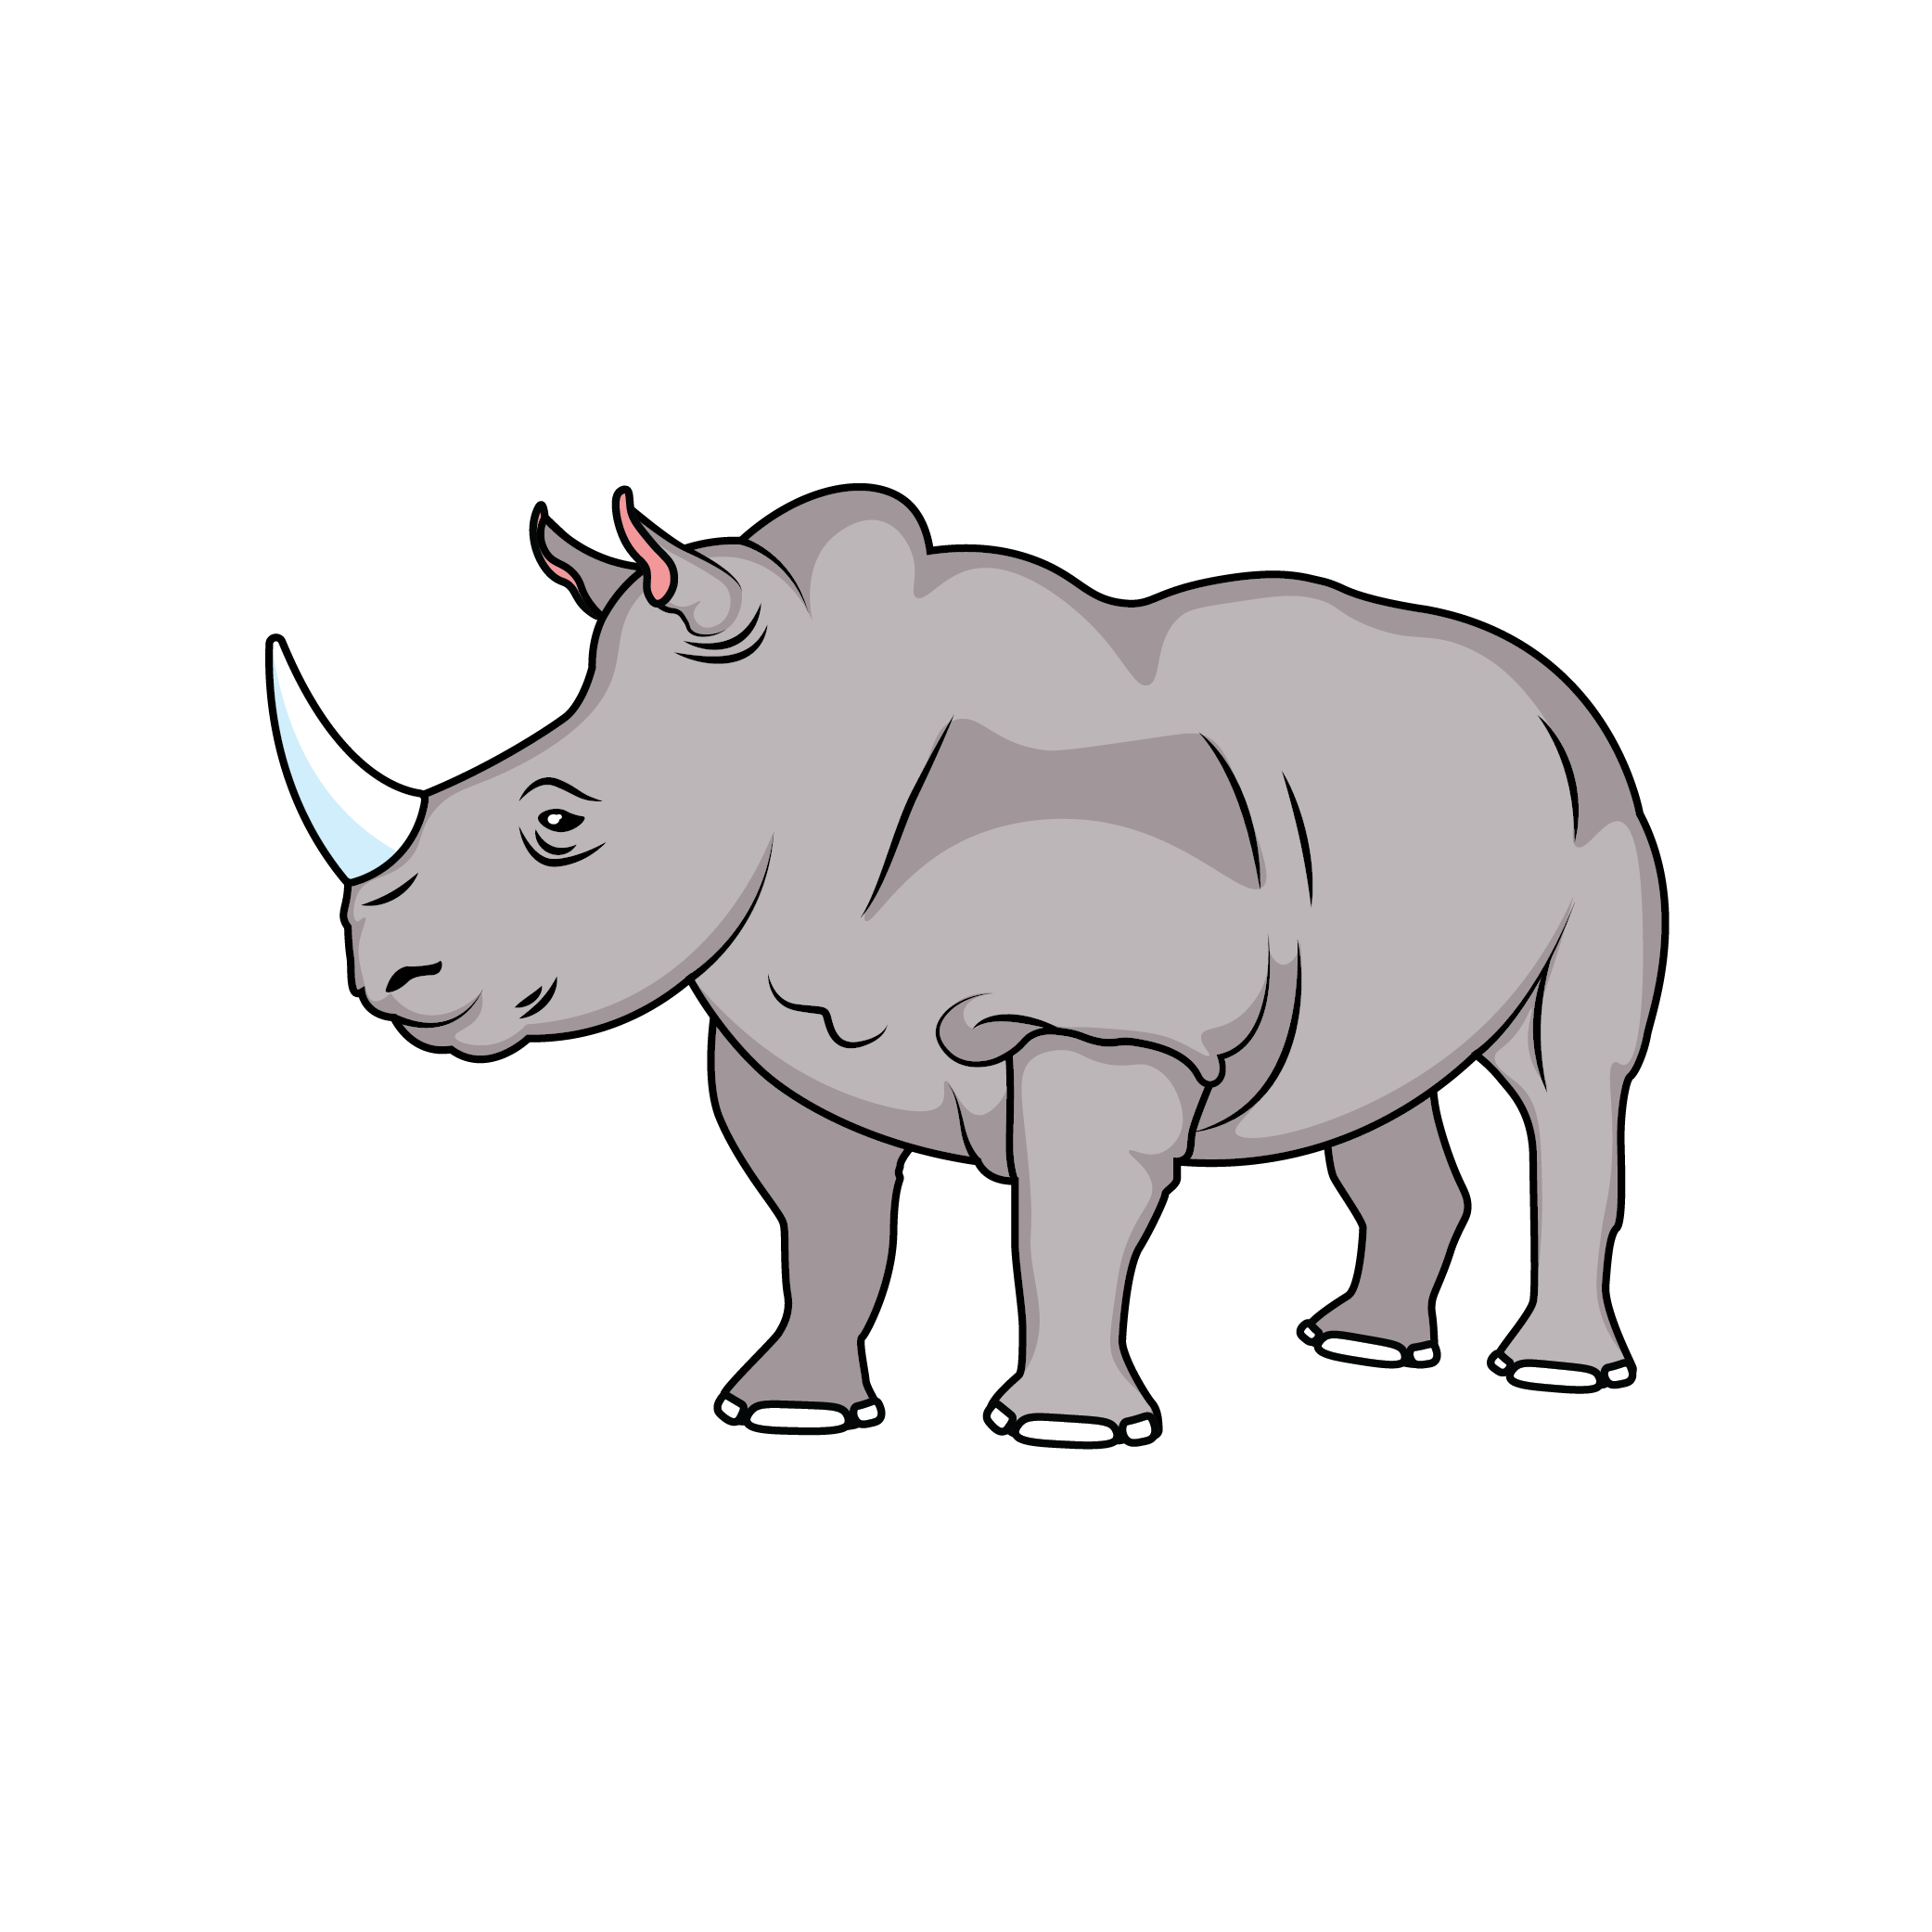 How to Draw A Rhino Step by Step Thumbnail